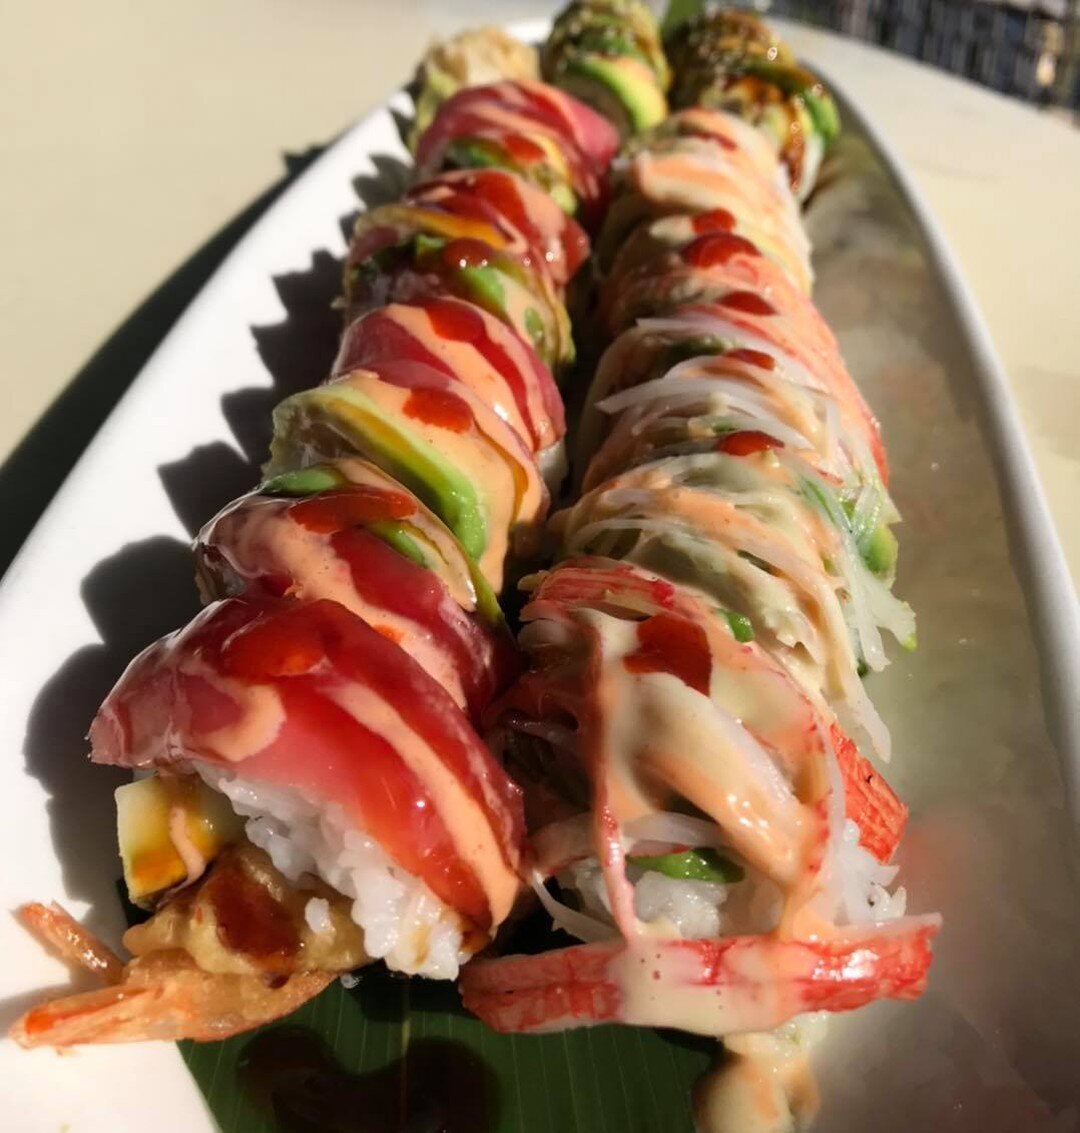 Who says you can&rsquo;t have sushi for breakfast 🙃
Unlimited fresh sushi available at our Sunday brunch buffet. We&rsquo;re here until 1pm!